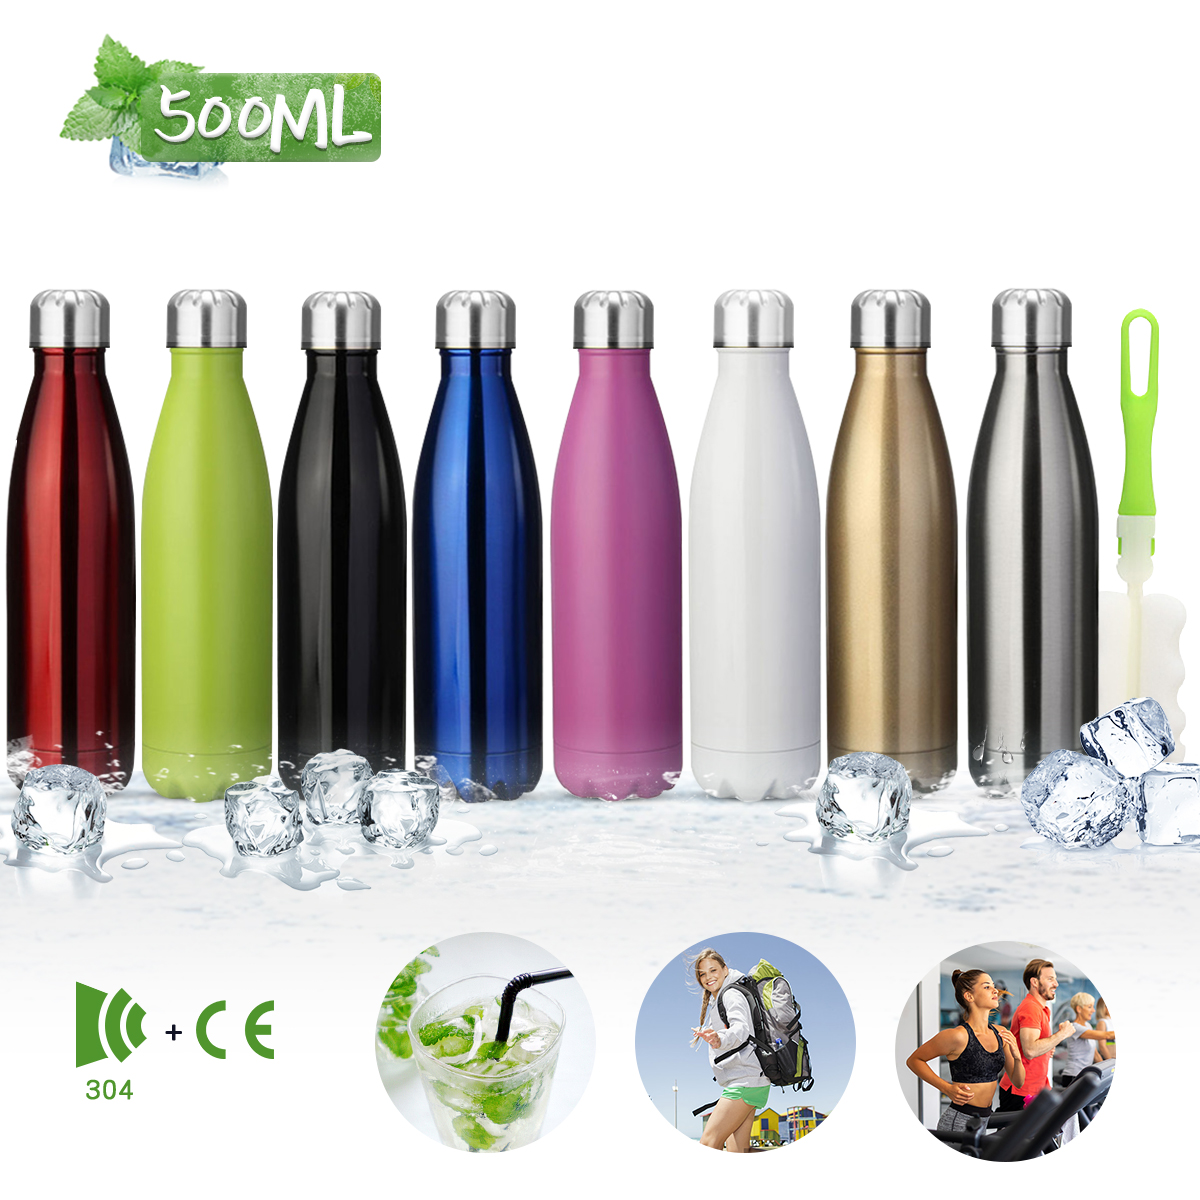 King-Do-Way-500ml-Insulated-Stainless-Steel-Water-Vacuum-Bottle-Double-Walled-for-Outdoor-Sports-Hik-1075556-1